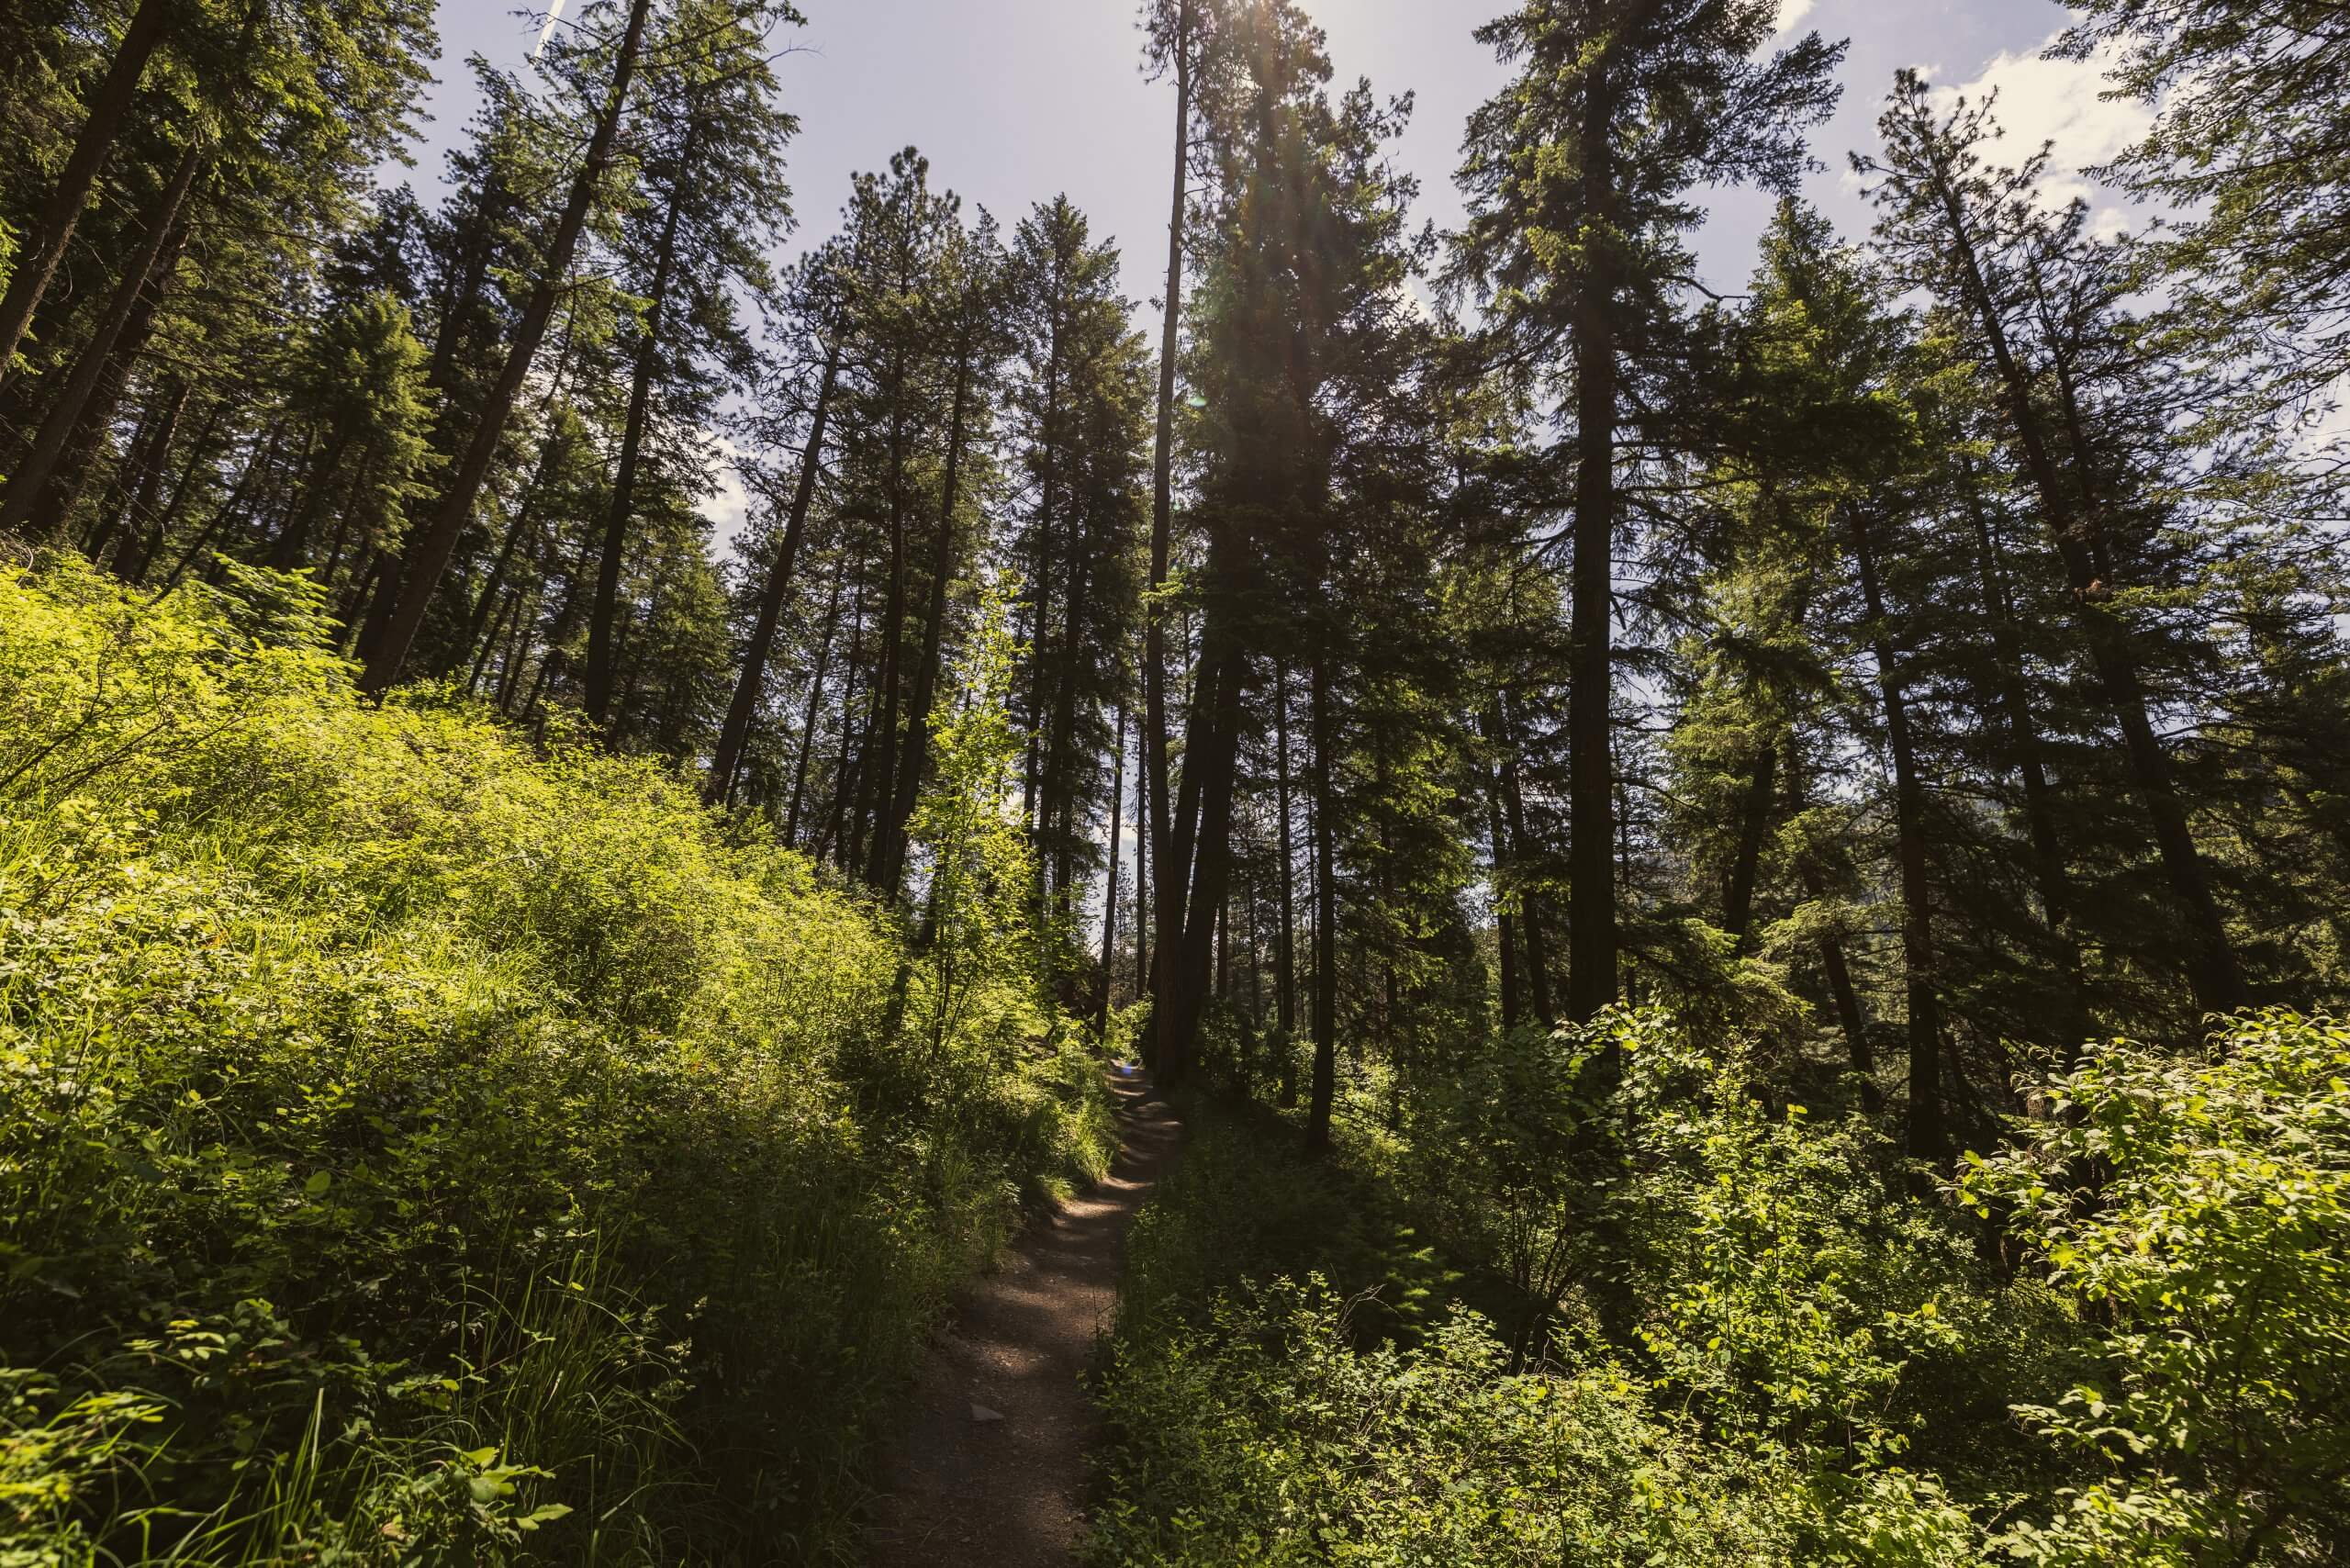 A trail surrounded by trees and greenery near Coeur d'Alene.